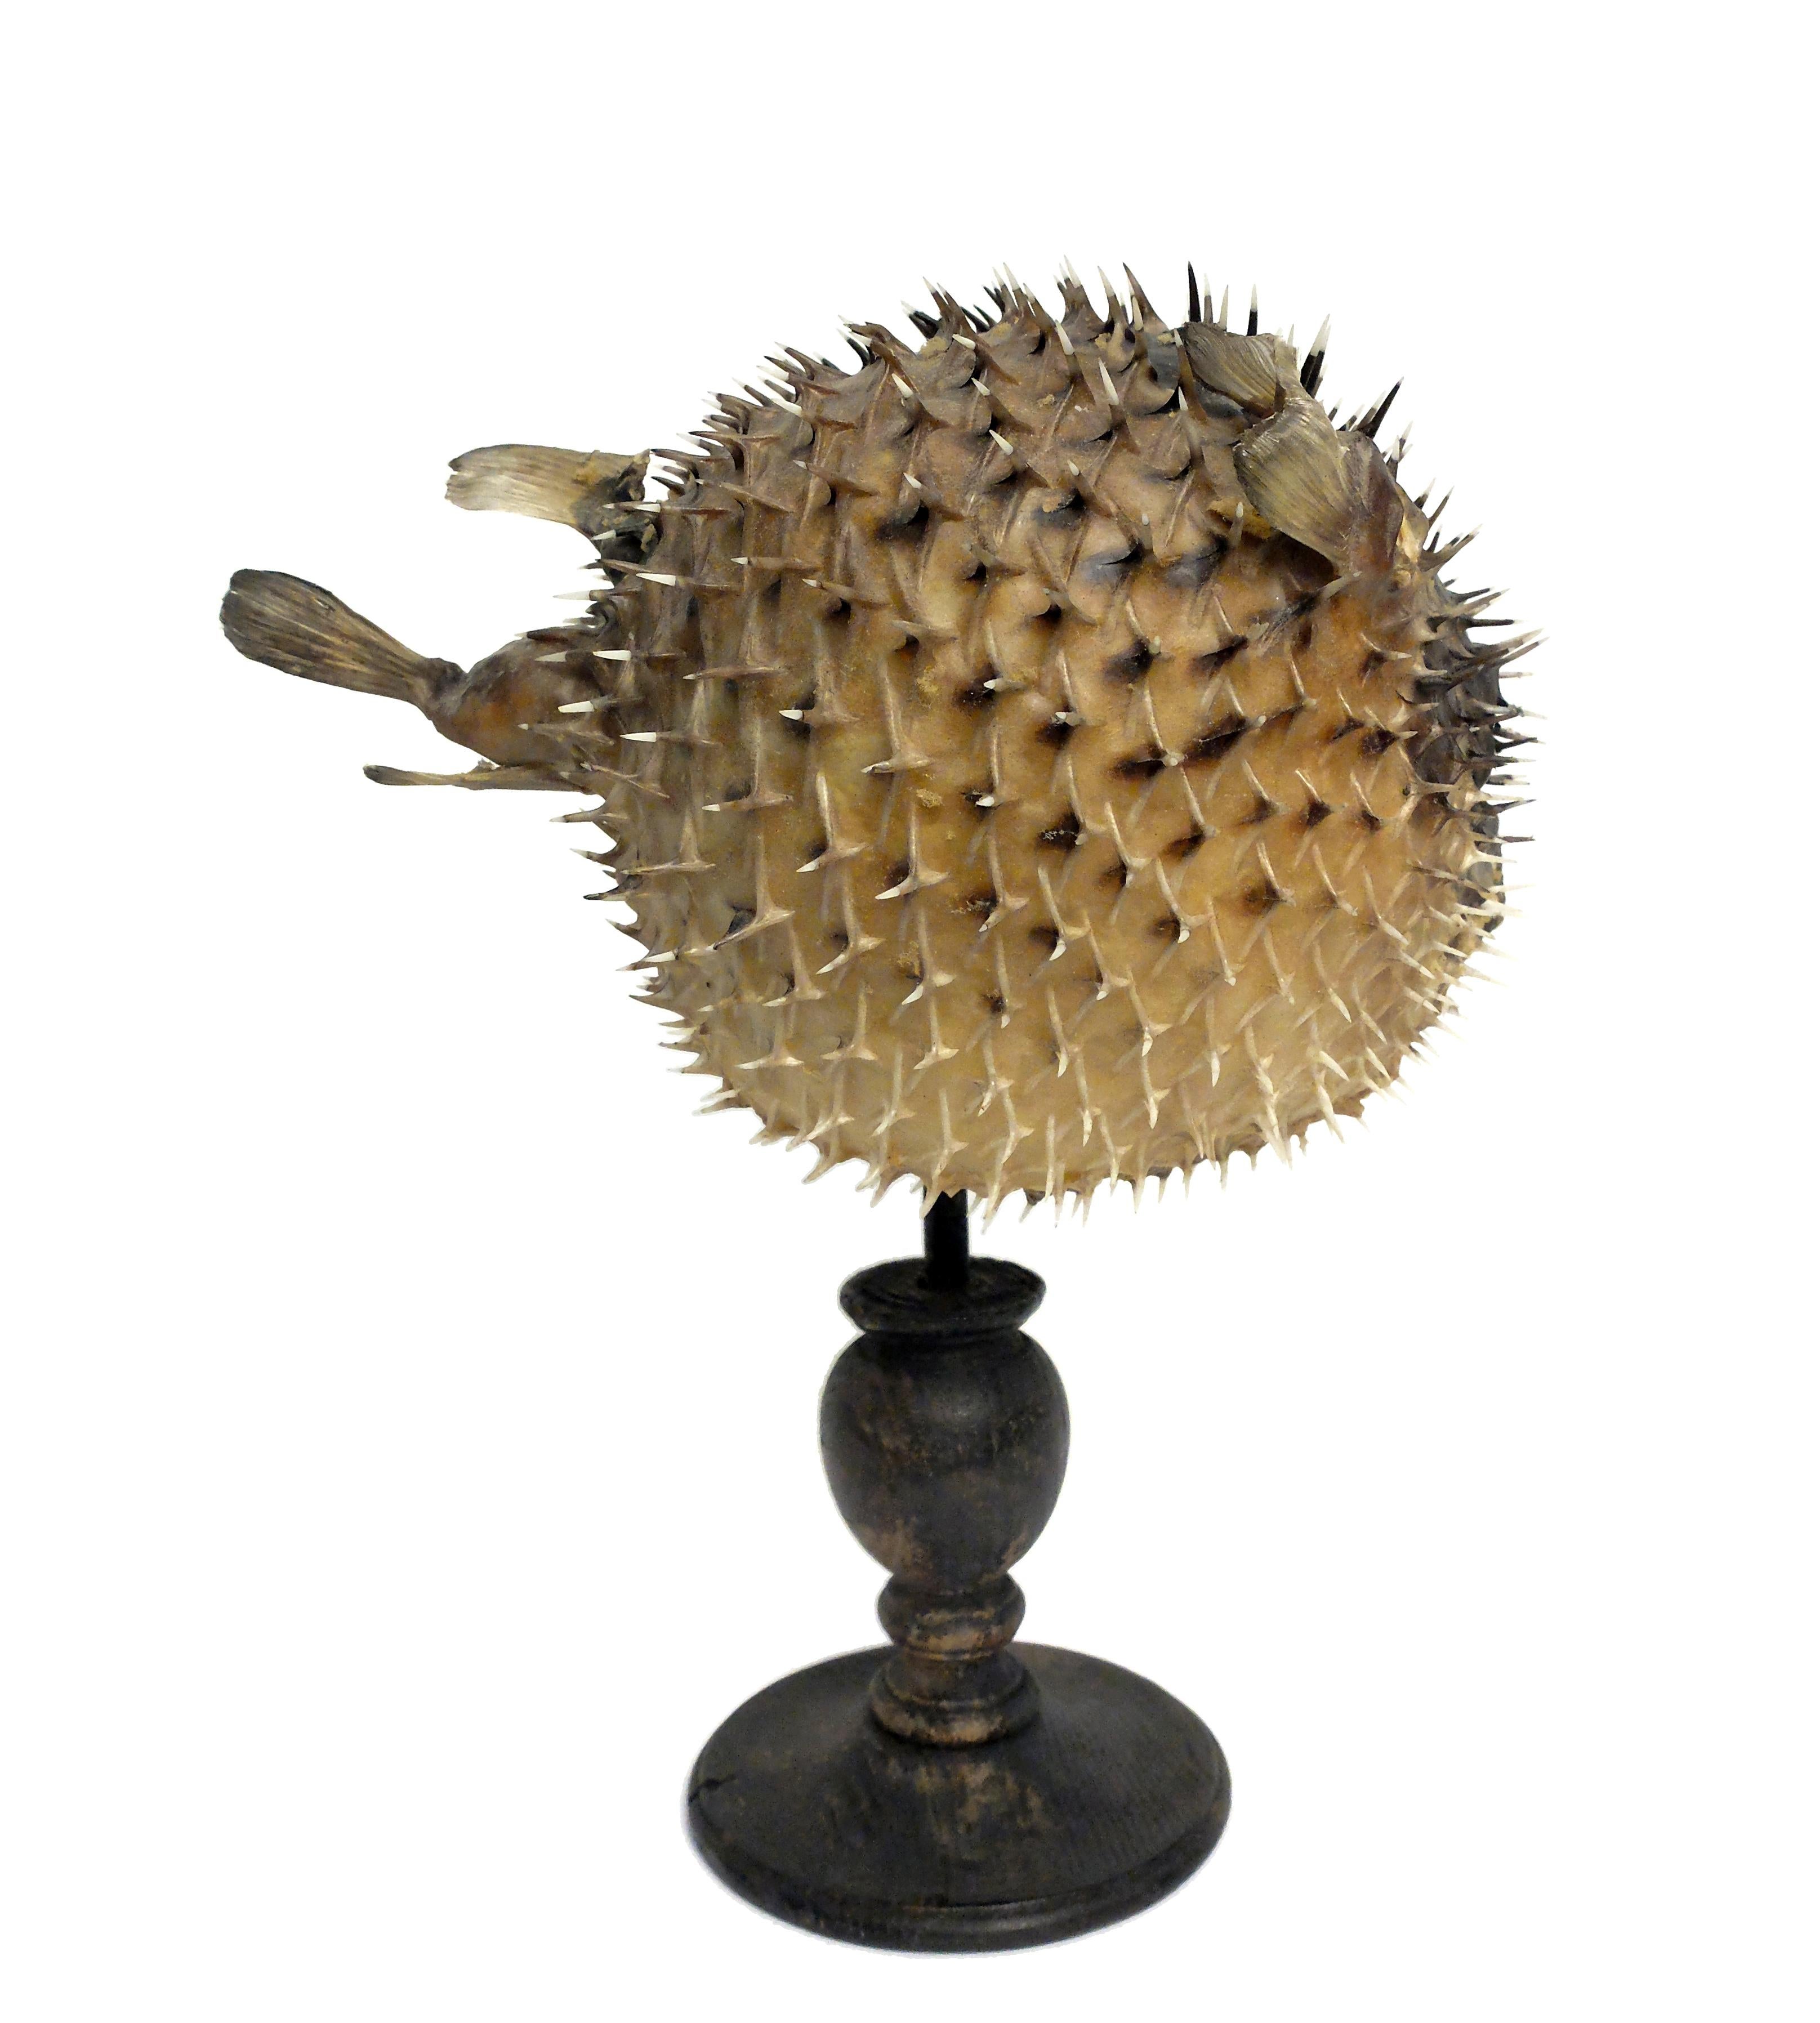 A 19th century Wunderkammer rare marine natural taxodermie specimen of a Porcupinefish (Tetradon Cutcutia). The specimen is stuffed, with glass eyes and mounted over a painted wooden base.